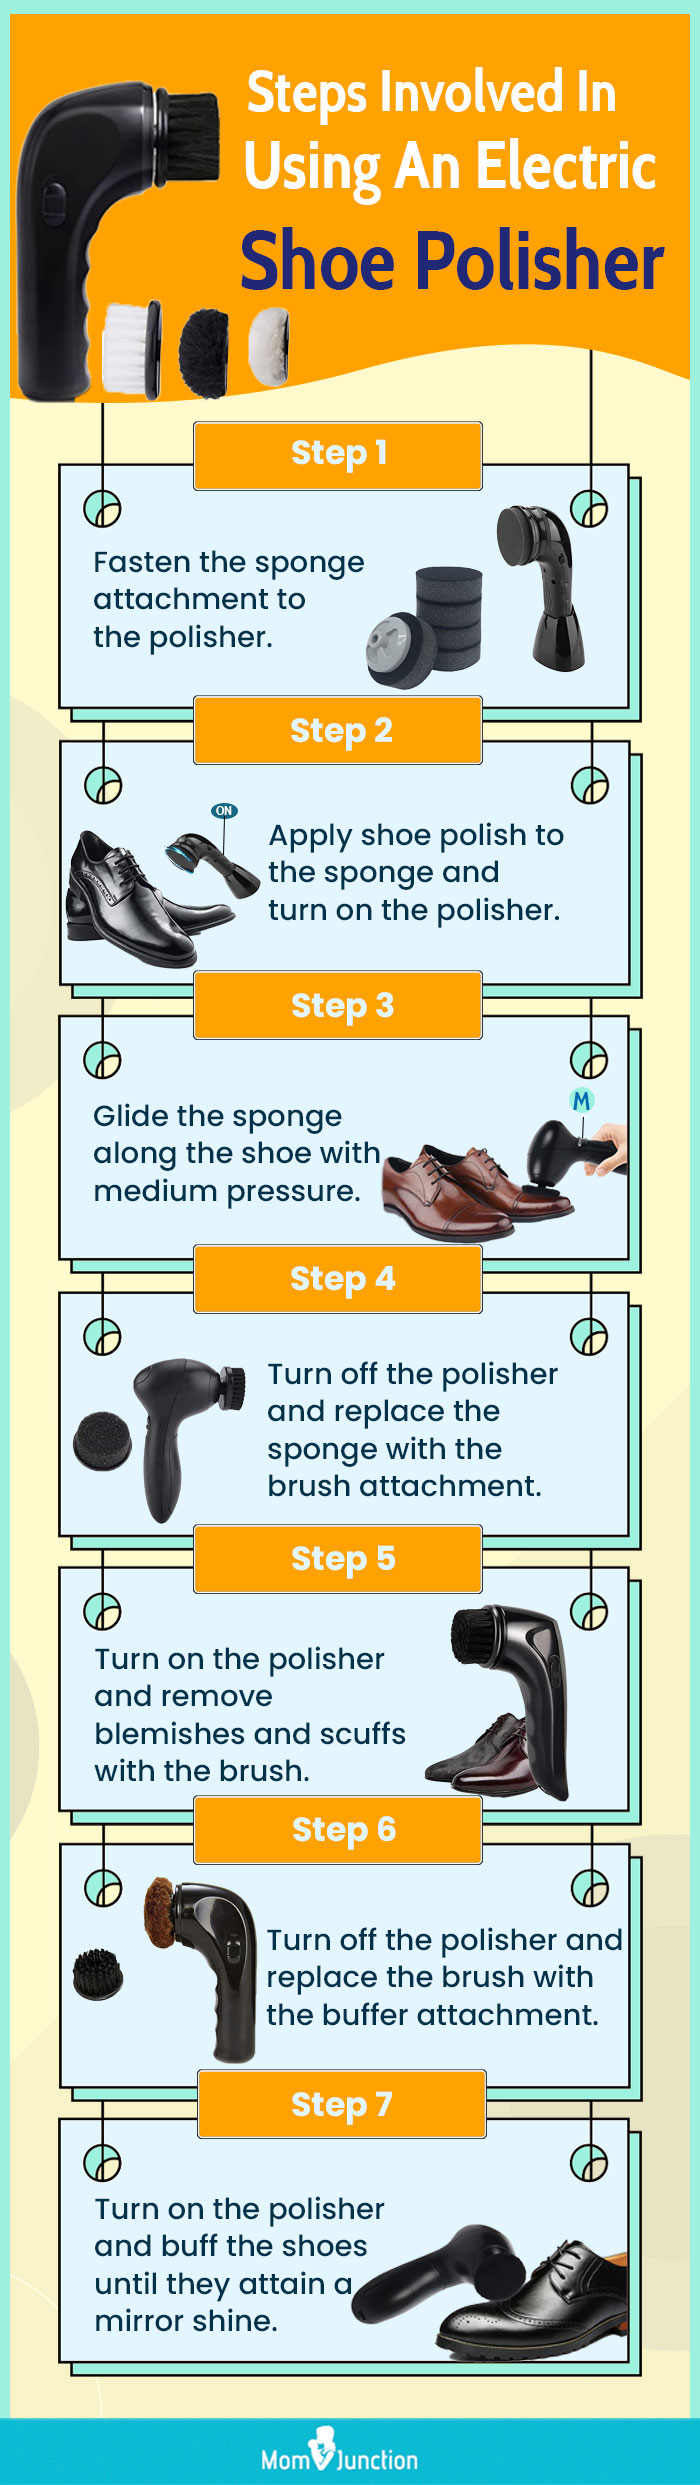 Steps Involved In Using An Electric Shoe Polisher (infographic)